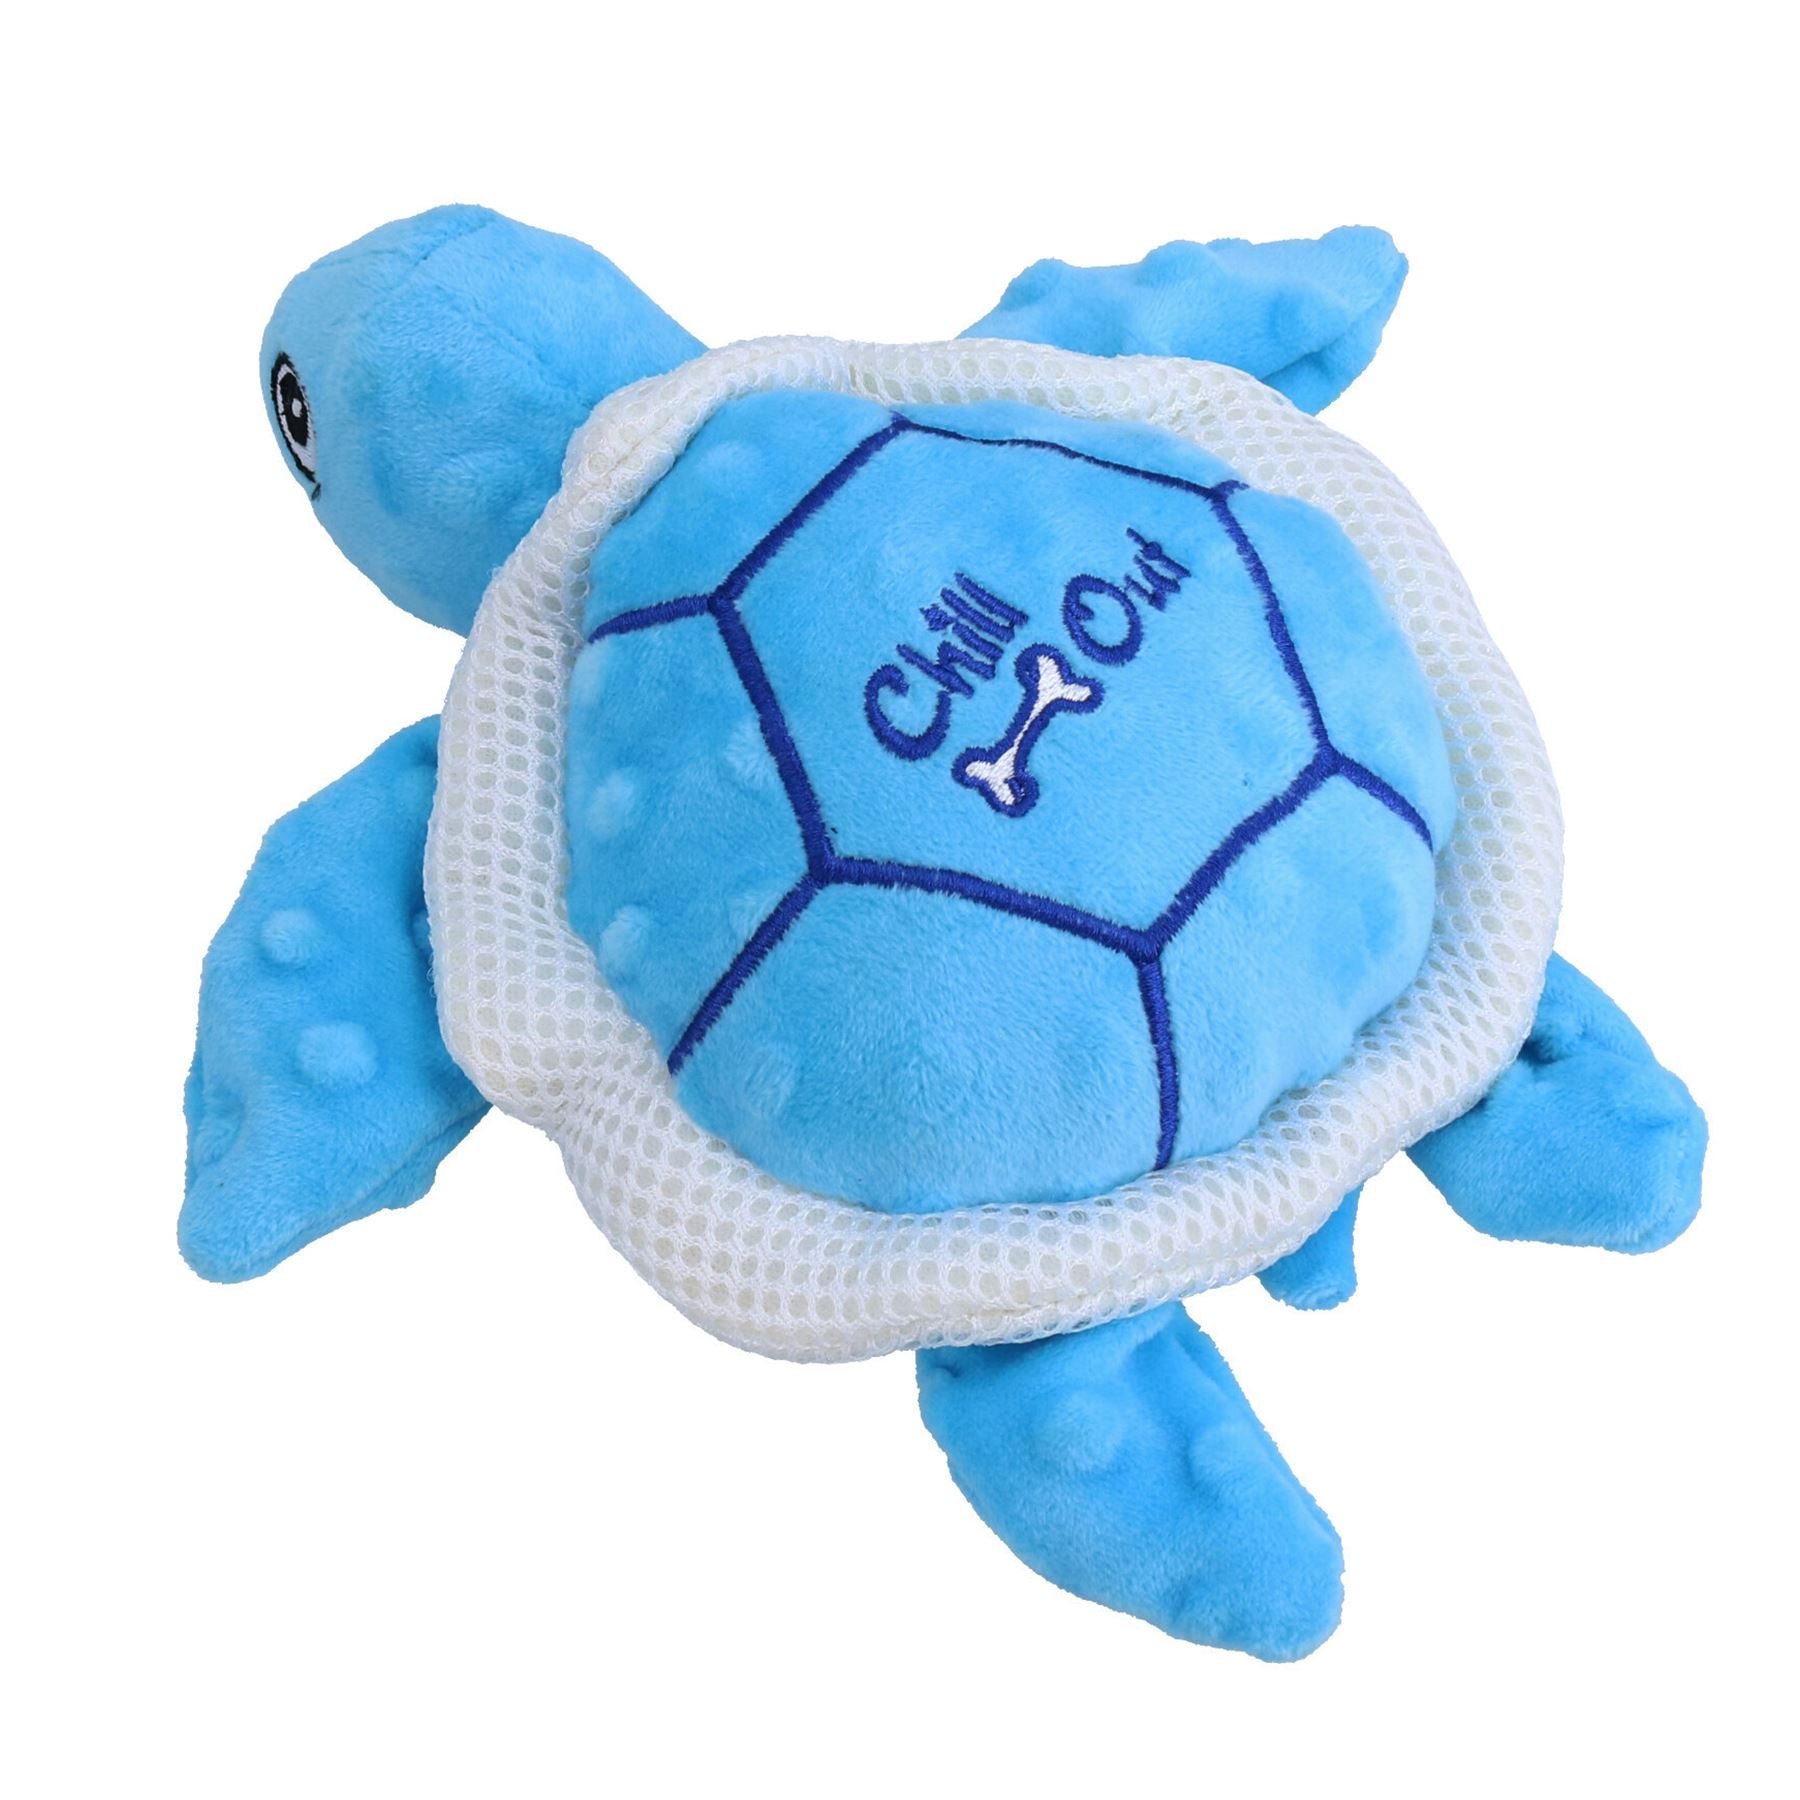 Chill Out Sea Turtle Dog Plush Hydration Cooling Summer Play Toy Home Pet Toy